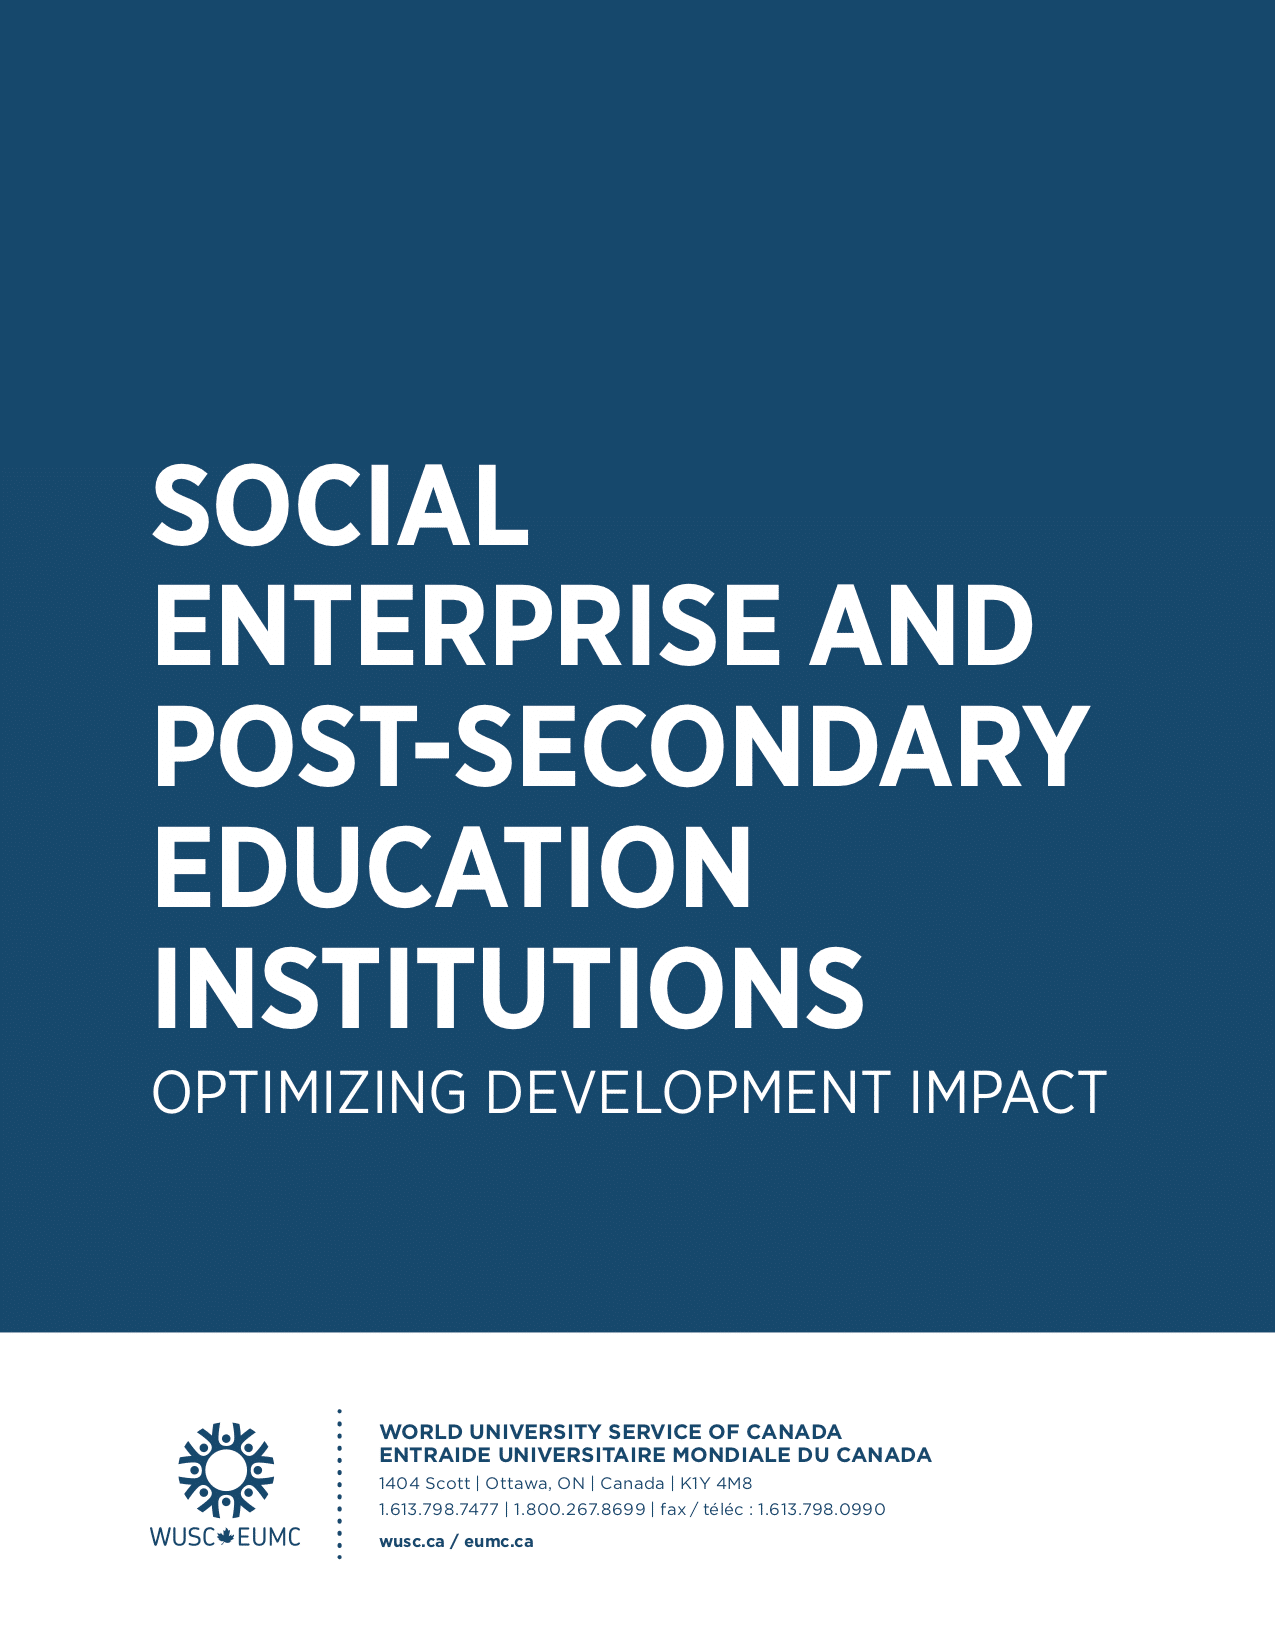 Social Enterprise and Post-Secondary Education Institutions Report Cover